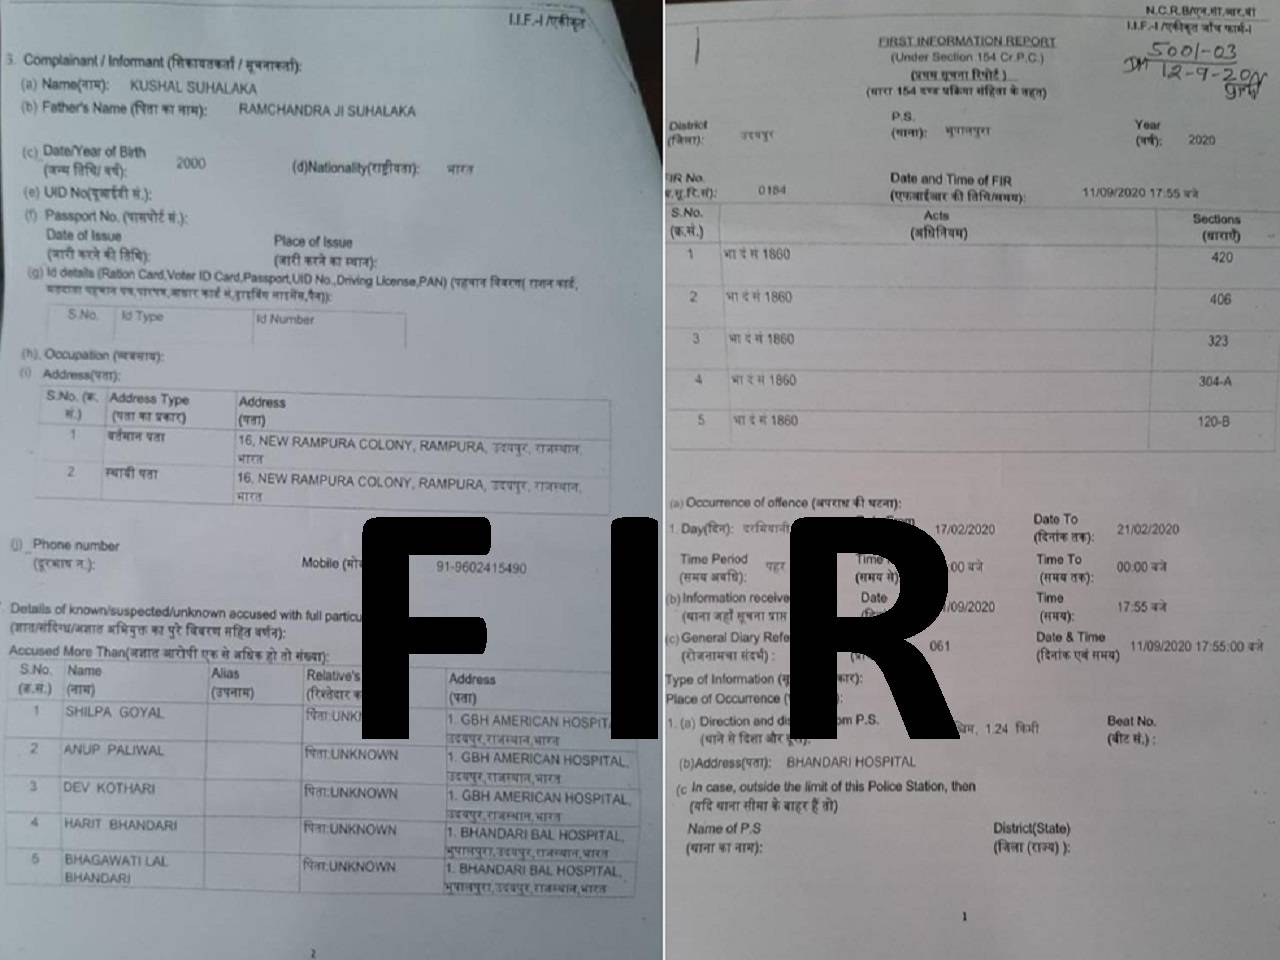 FIR filed under CrPC 156(3) against doctors at Bhandari Childrens Hospital and GBH American, Udaipur